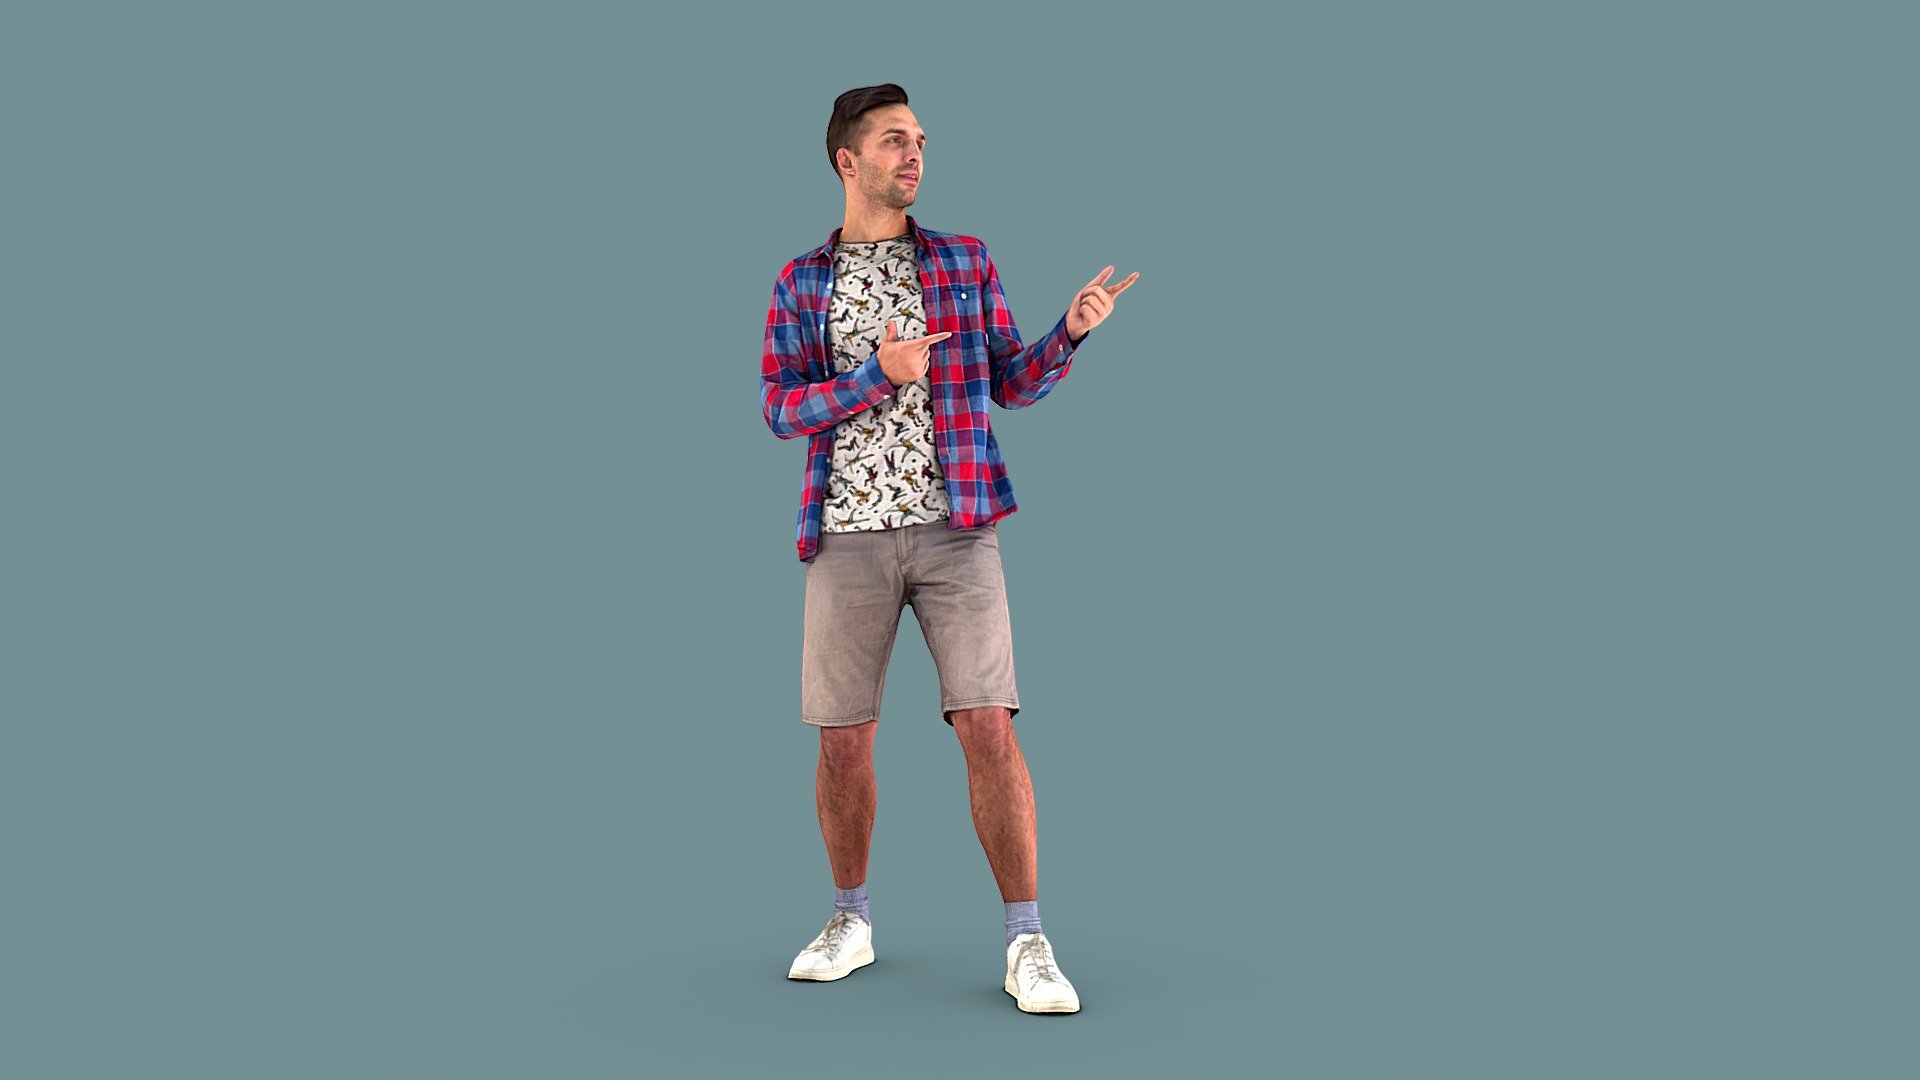 Follow us on Instagram 👍🏻

✉️ A young handsome guy with a bristle has fun, lights up, flirts with girls, the soul of the company, dances. He is wearing a printed T-shirt, colored plaid shirt, shorts and sneakers.

🦾 This model will be an excellent mid-range participant. It does not need to be very close and try to see the details, it reveals and demonstrates its texture as much as possible in case of a certain distance from the foreground.

⚙️ Photorealistic Casual Character 3d model ready for Virtual Reality (VR), Augmented Reality (AR), games and other real-time apps. Suitable for the architectural visualization and another graphical projects. 50 000 polygons per model 3d model